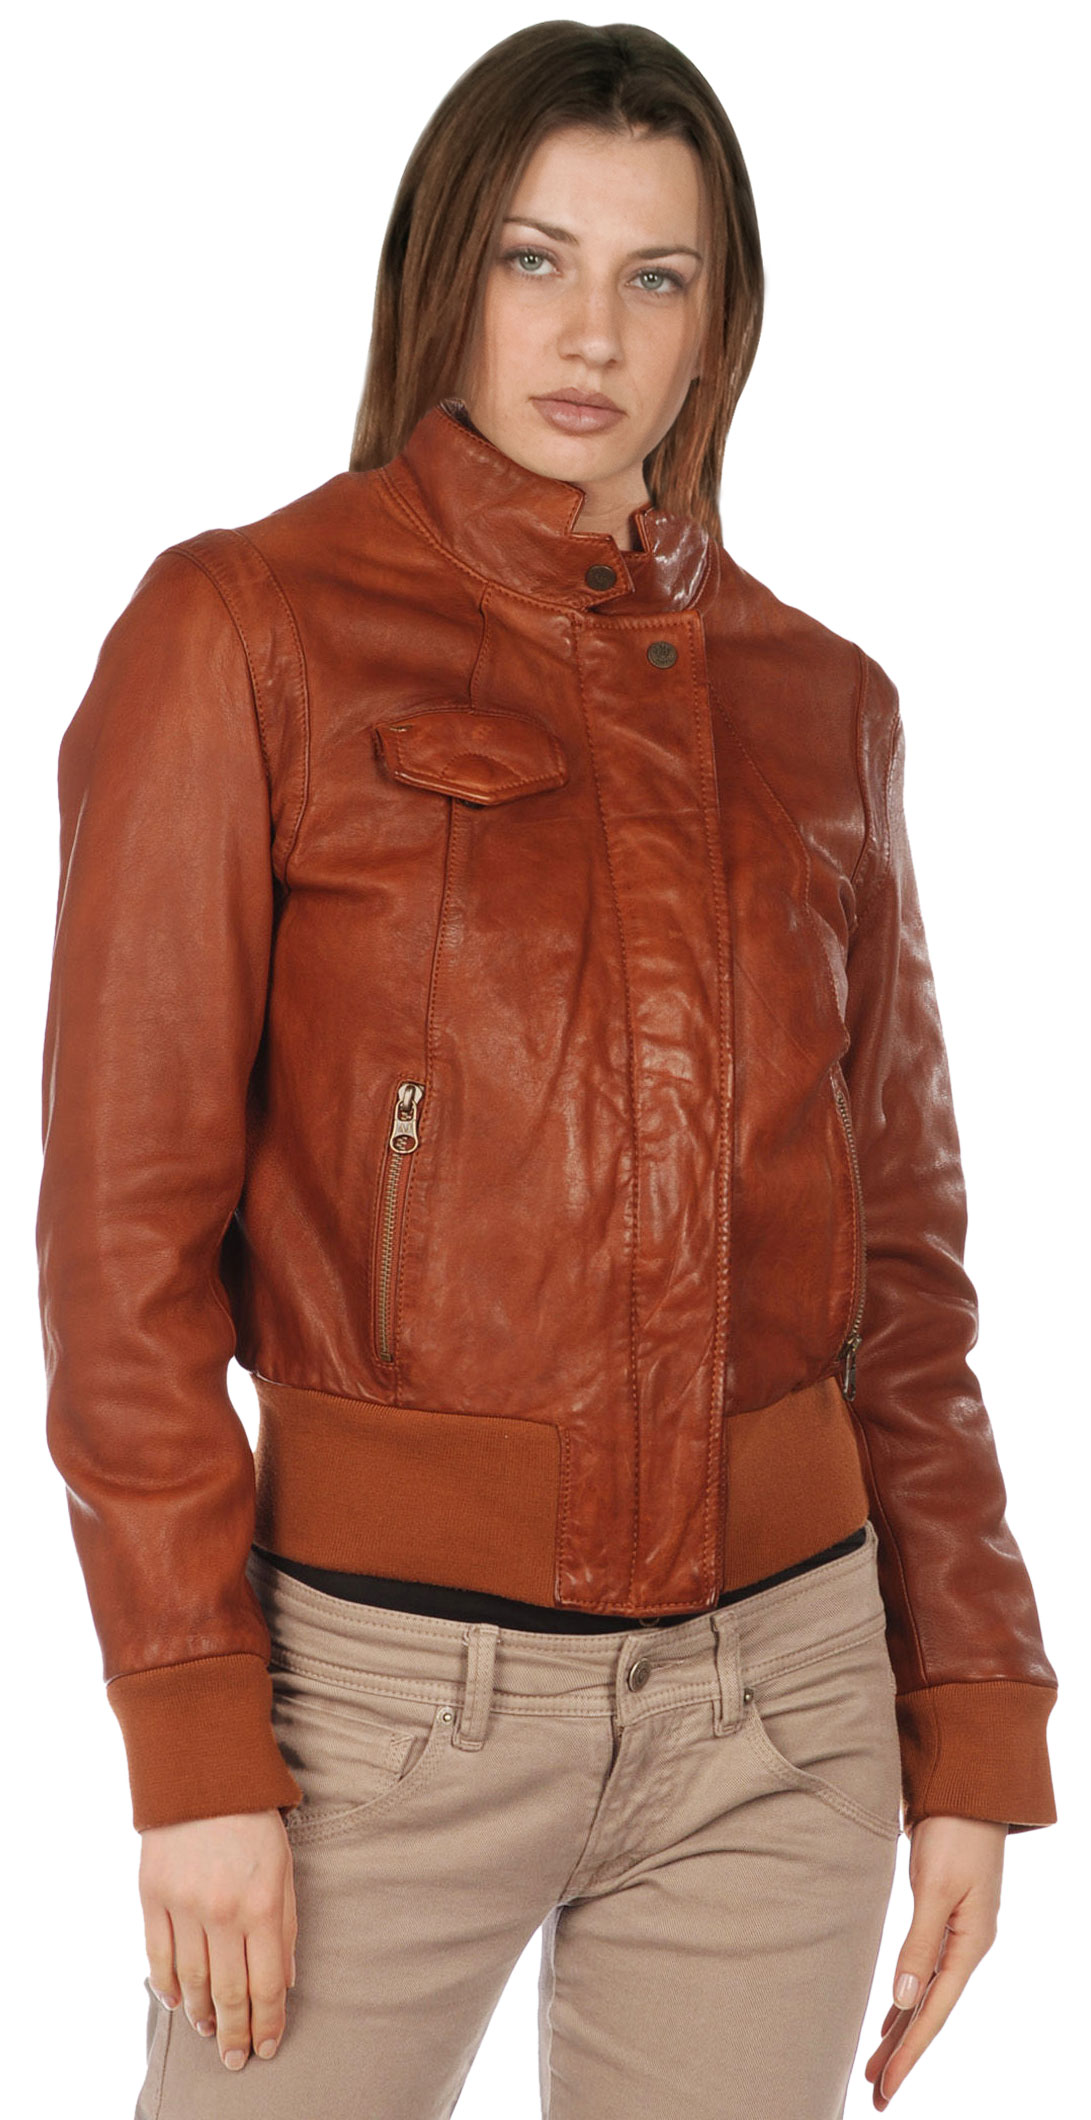 Three Cool Ways to Style your Leather Bomber Jacket